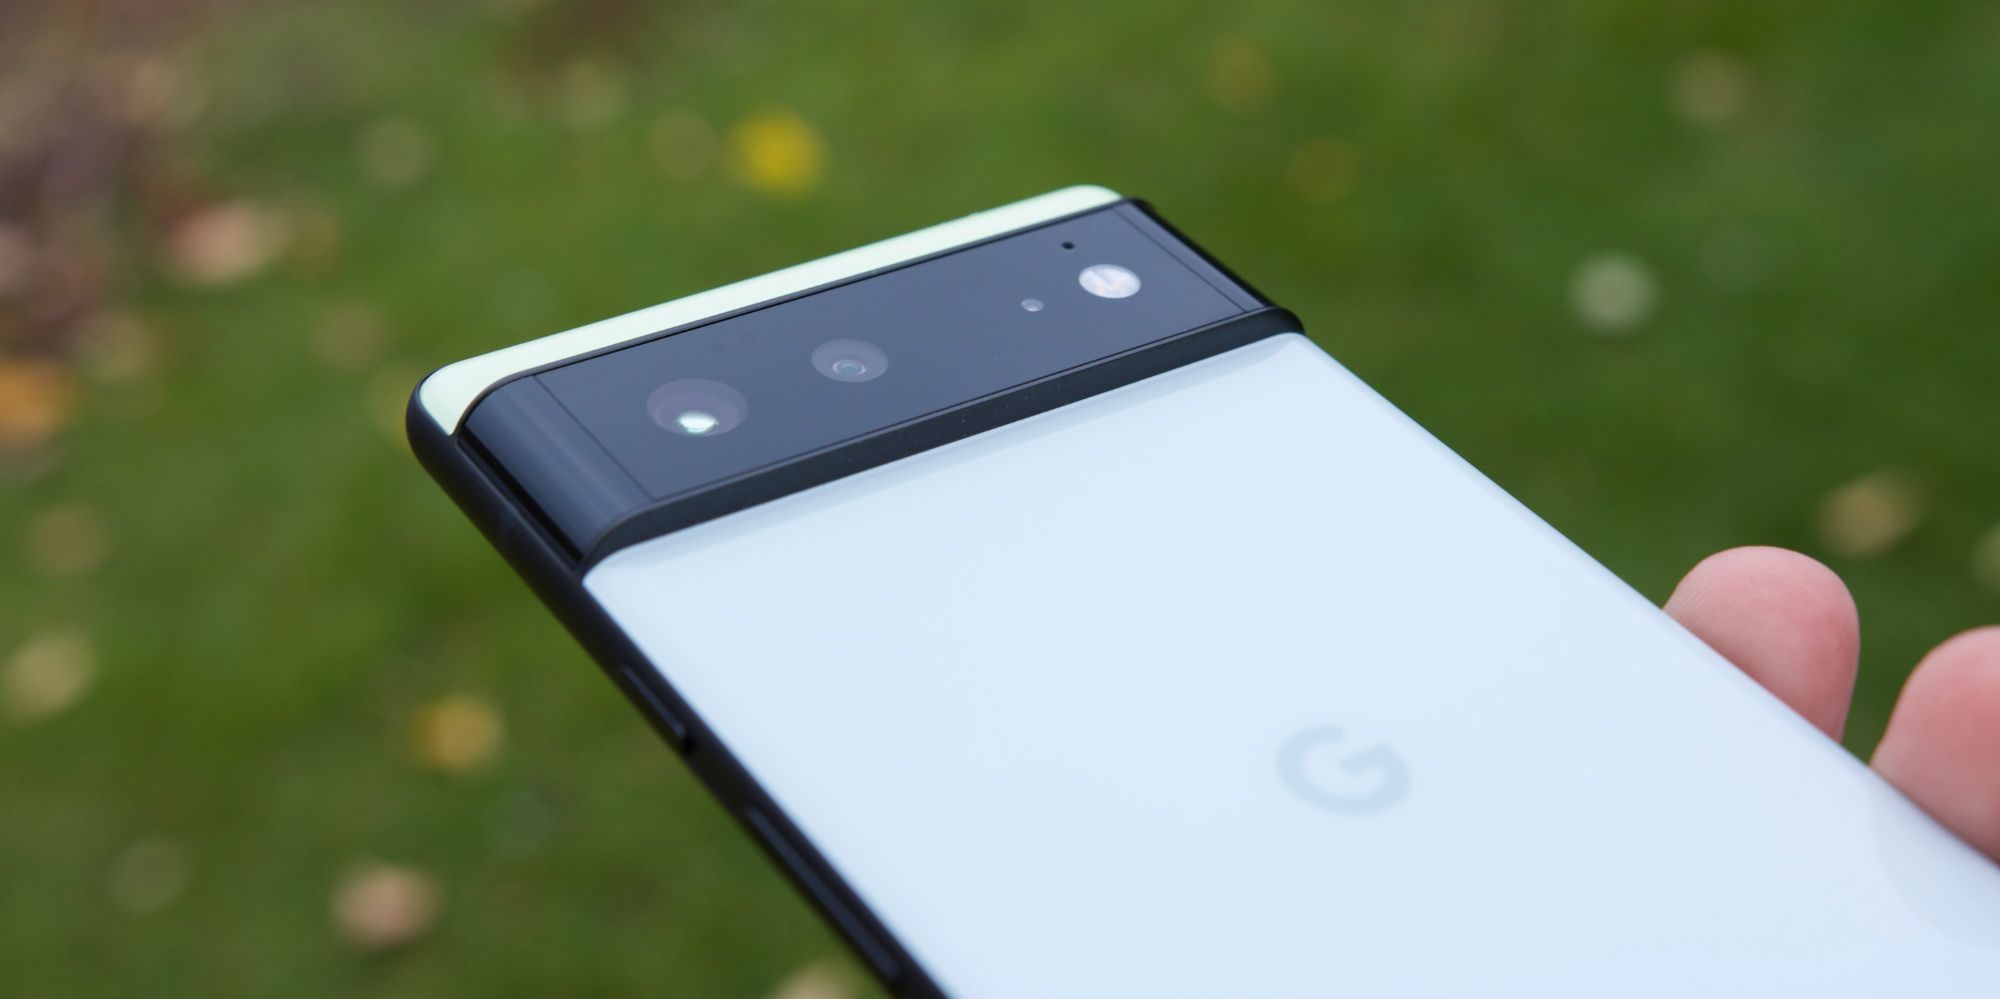 How To Use Live Translate On The Google Pixel 6 & Understand Any Language